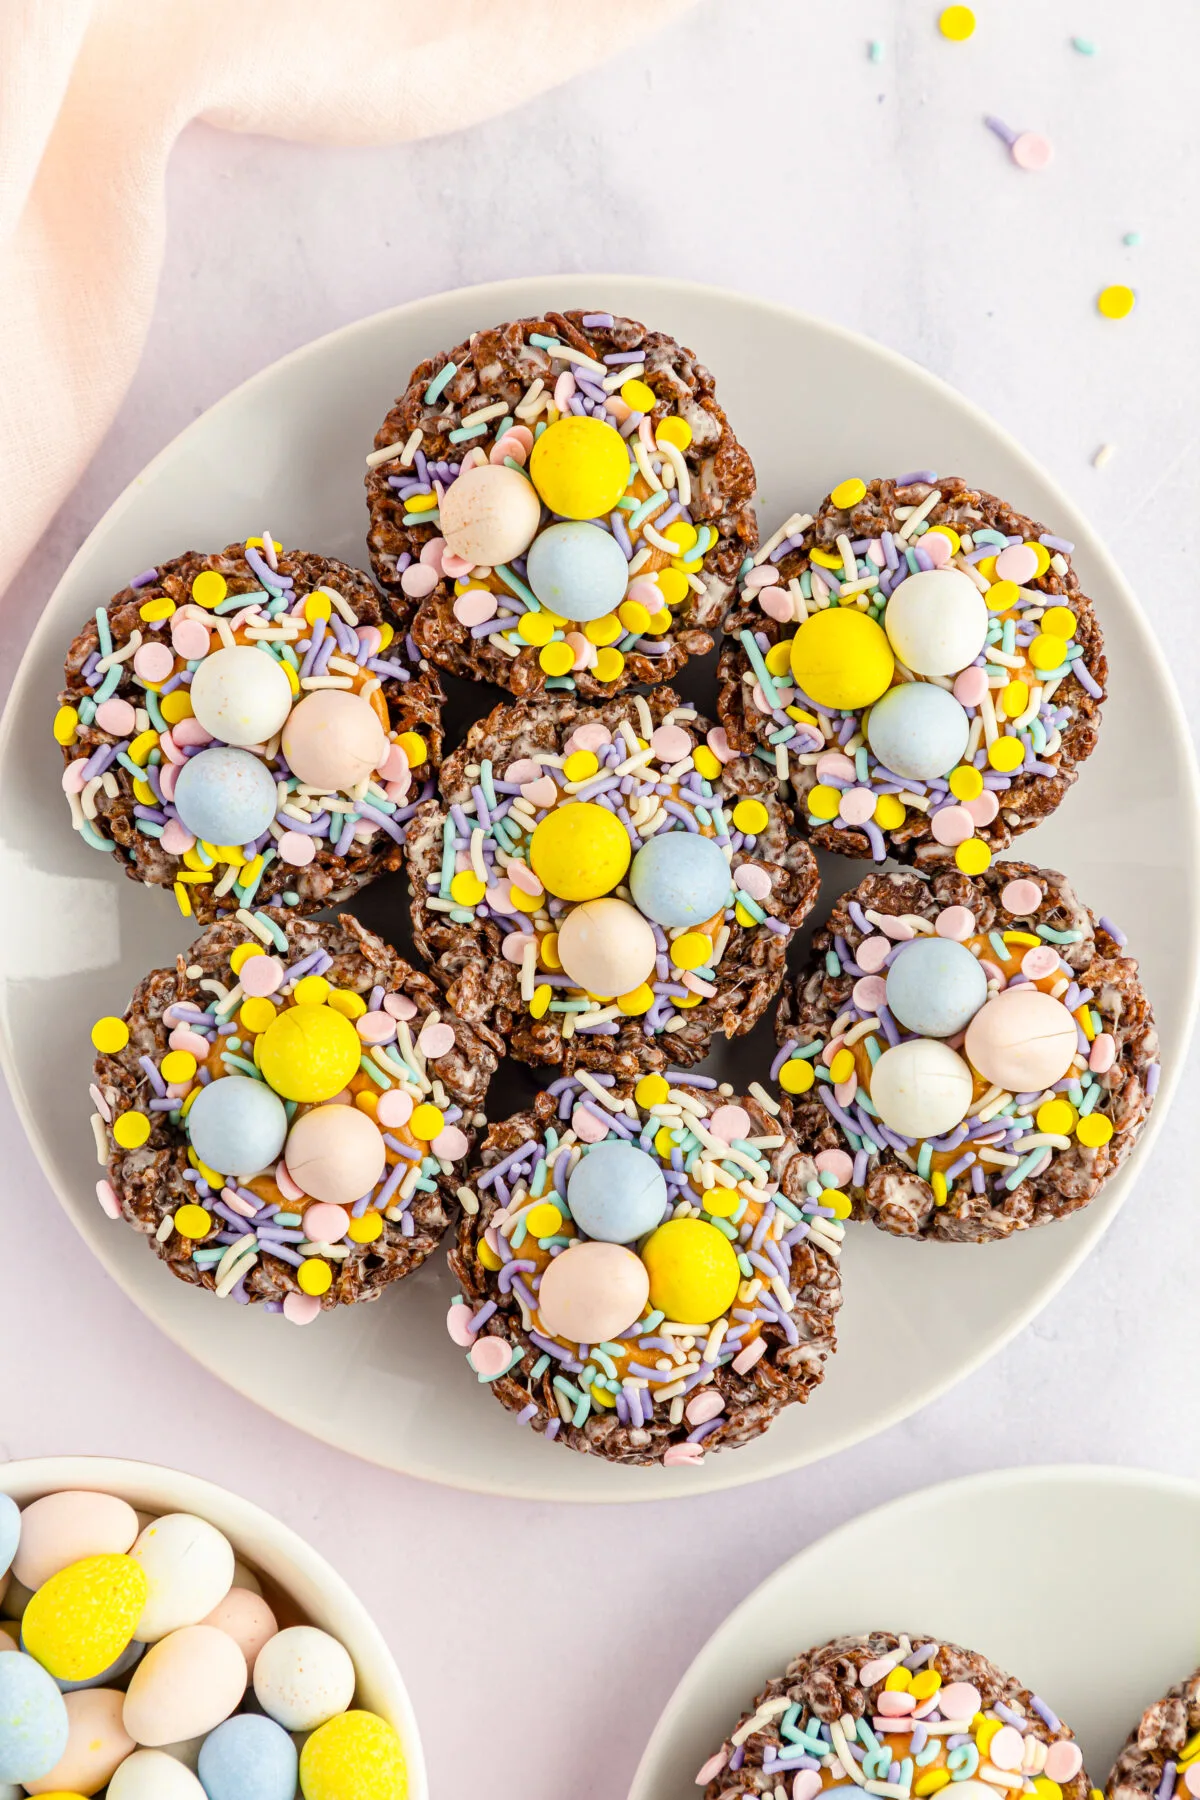 Celebrate this Easter with these Cocoa Pebbles Easter Nests filled with creamy peanut butter and topped off with chocolate eggs.